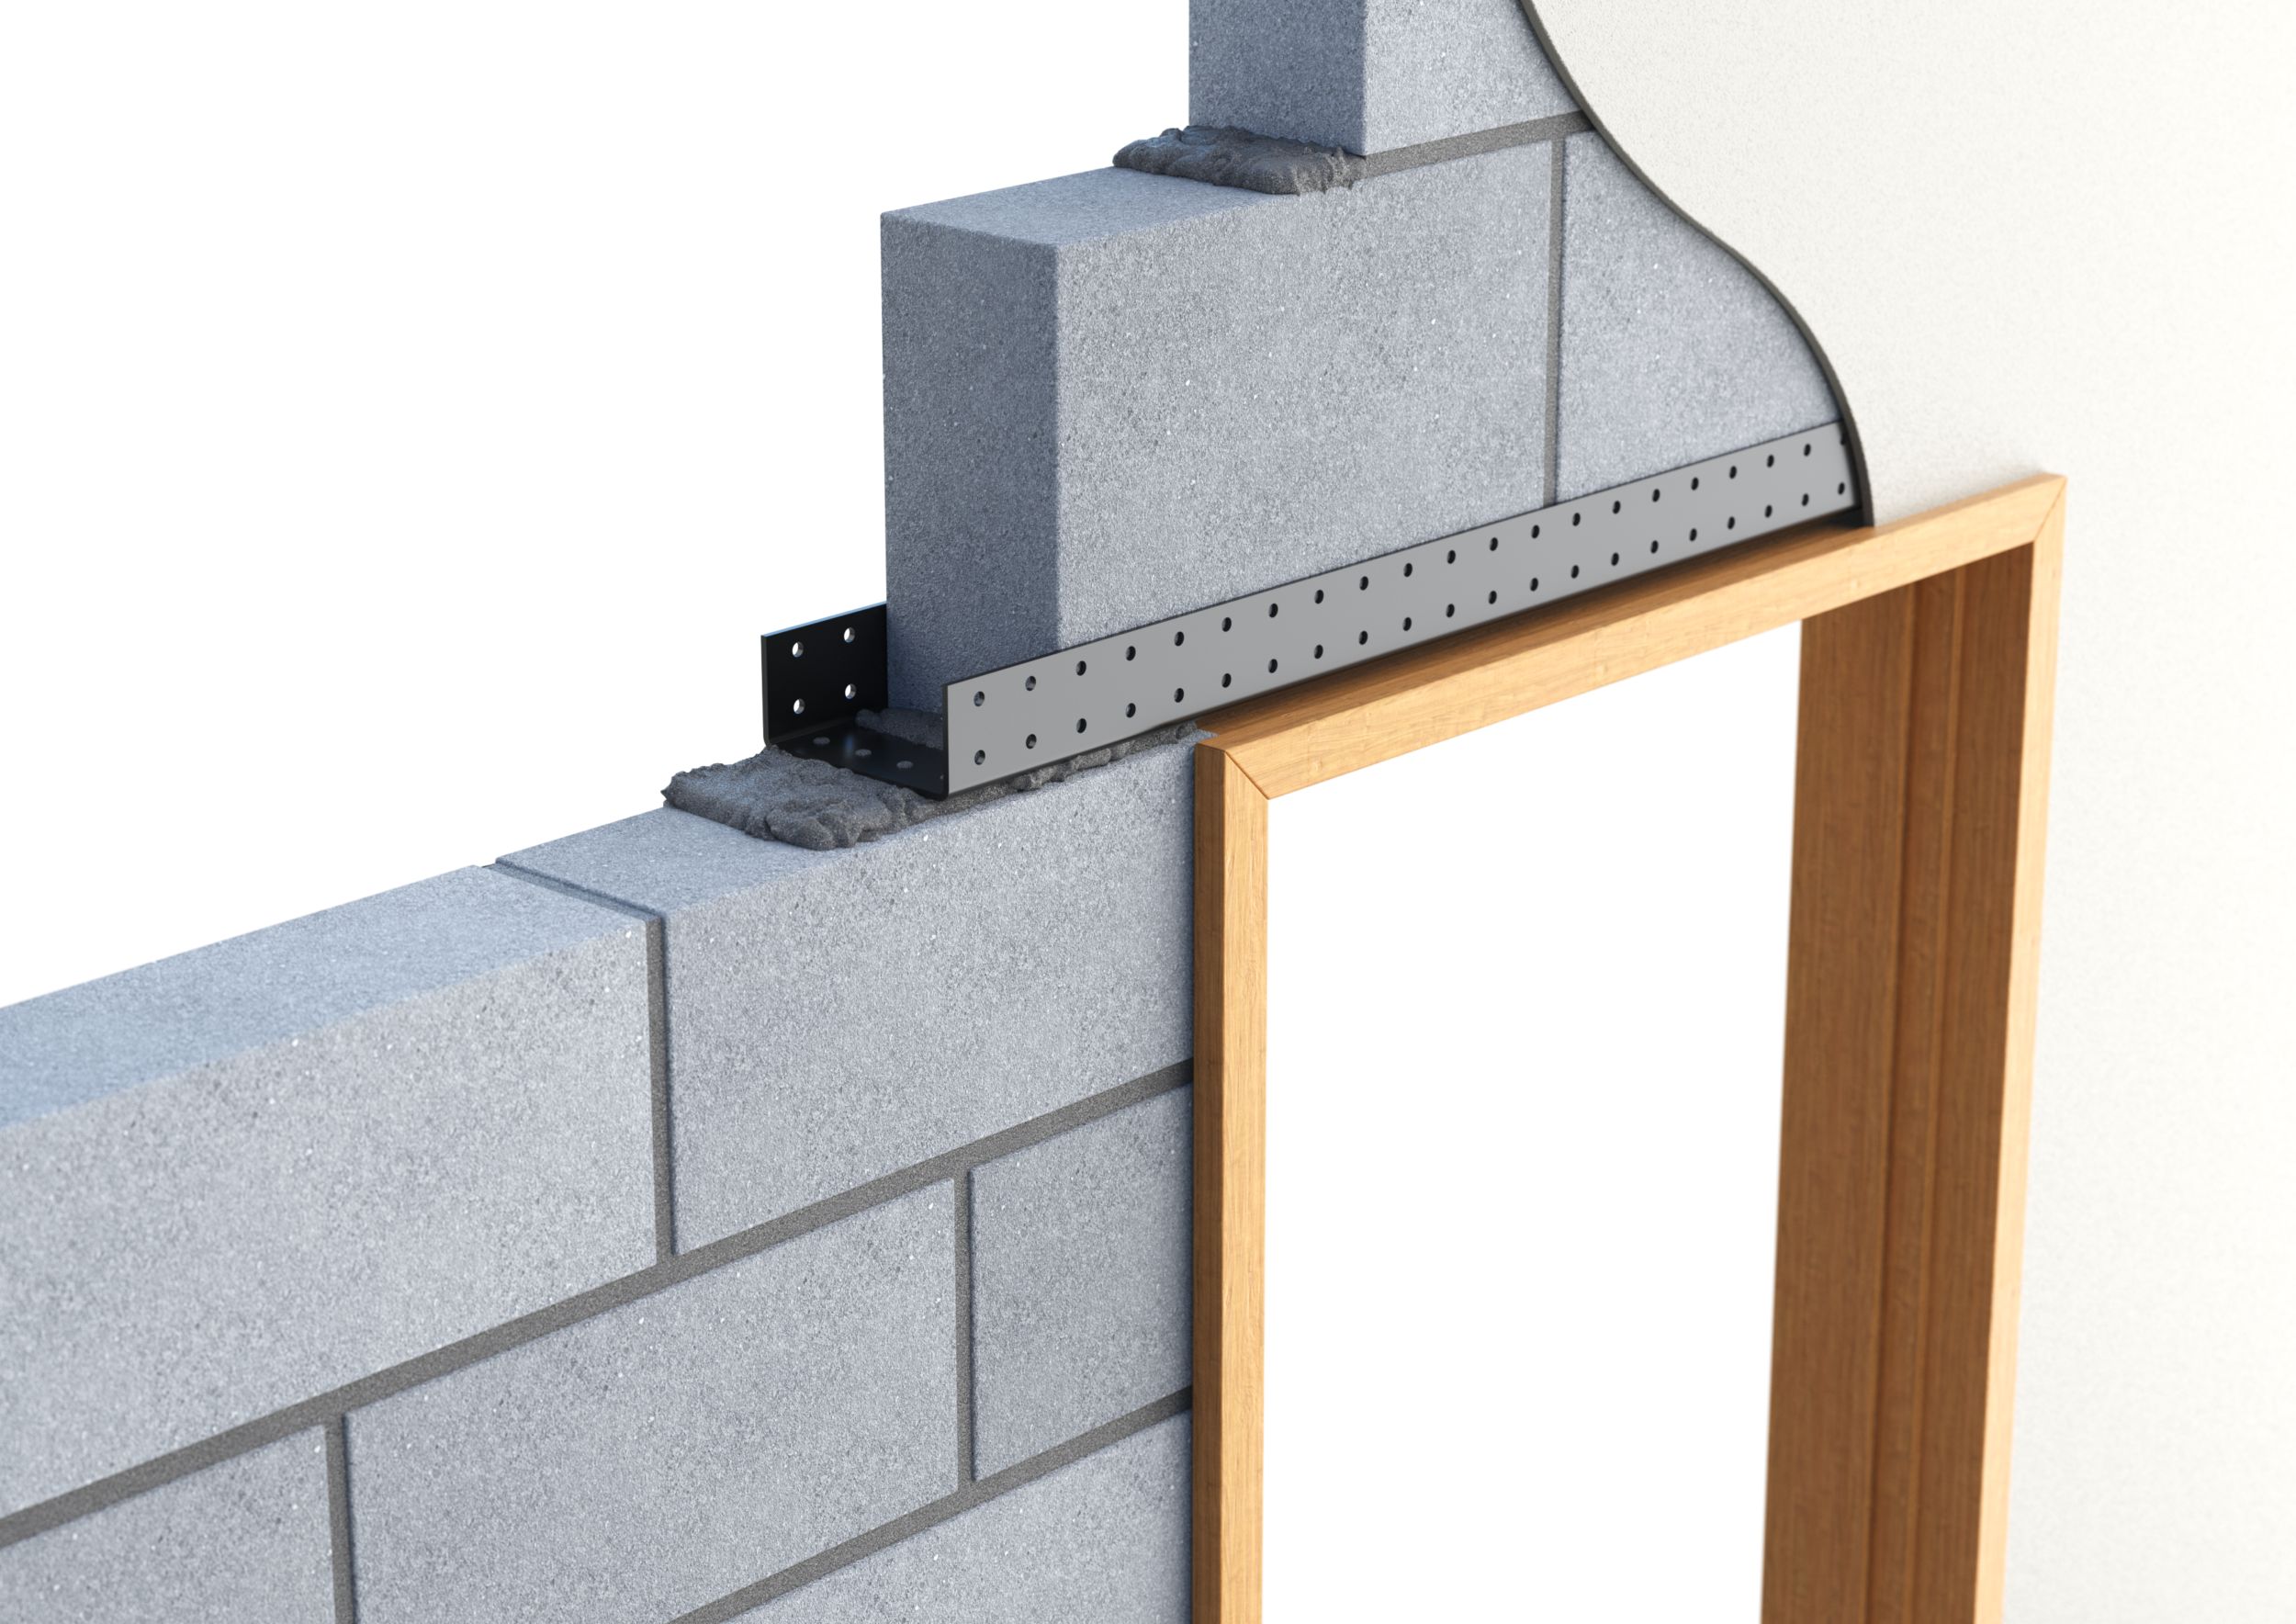 catnic channel lintel installed in solid wall